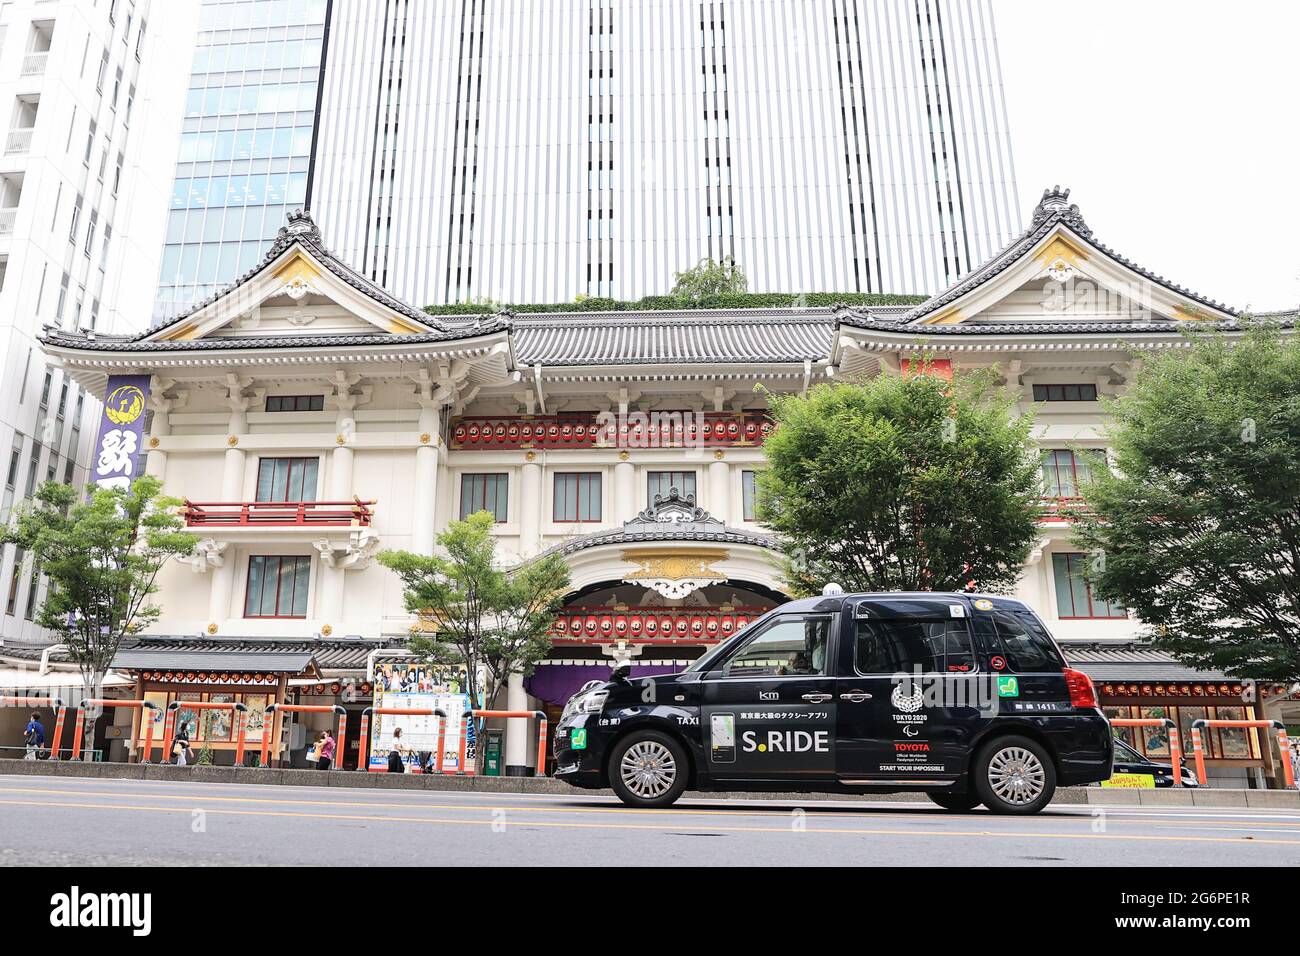 JULY 7, 2021 : A taxi marked with 2020 Tokyo Olympic Games emblem is seen in Tokyo, Japan. Credit: AFLO SPORT/Alamy Live News Stock Photo